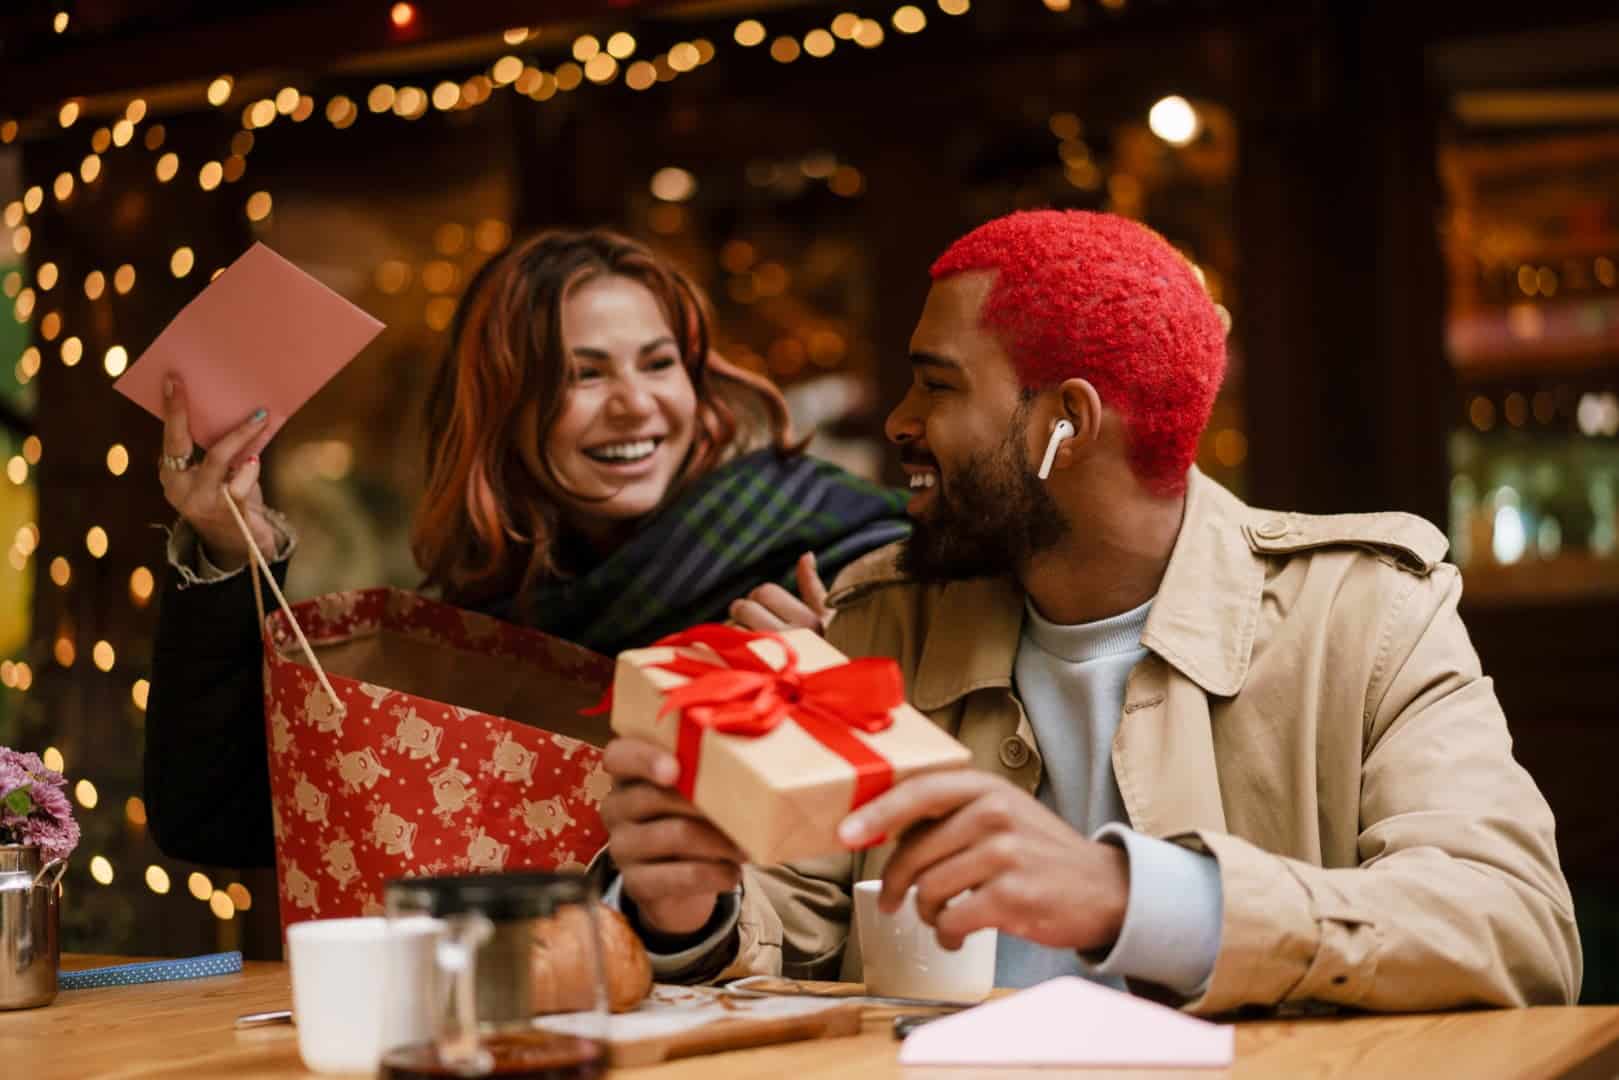 Gift Ideas for a Couple featured image of two people holding a gift